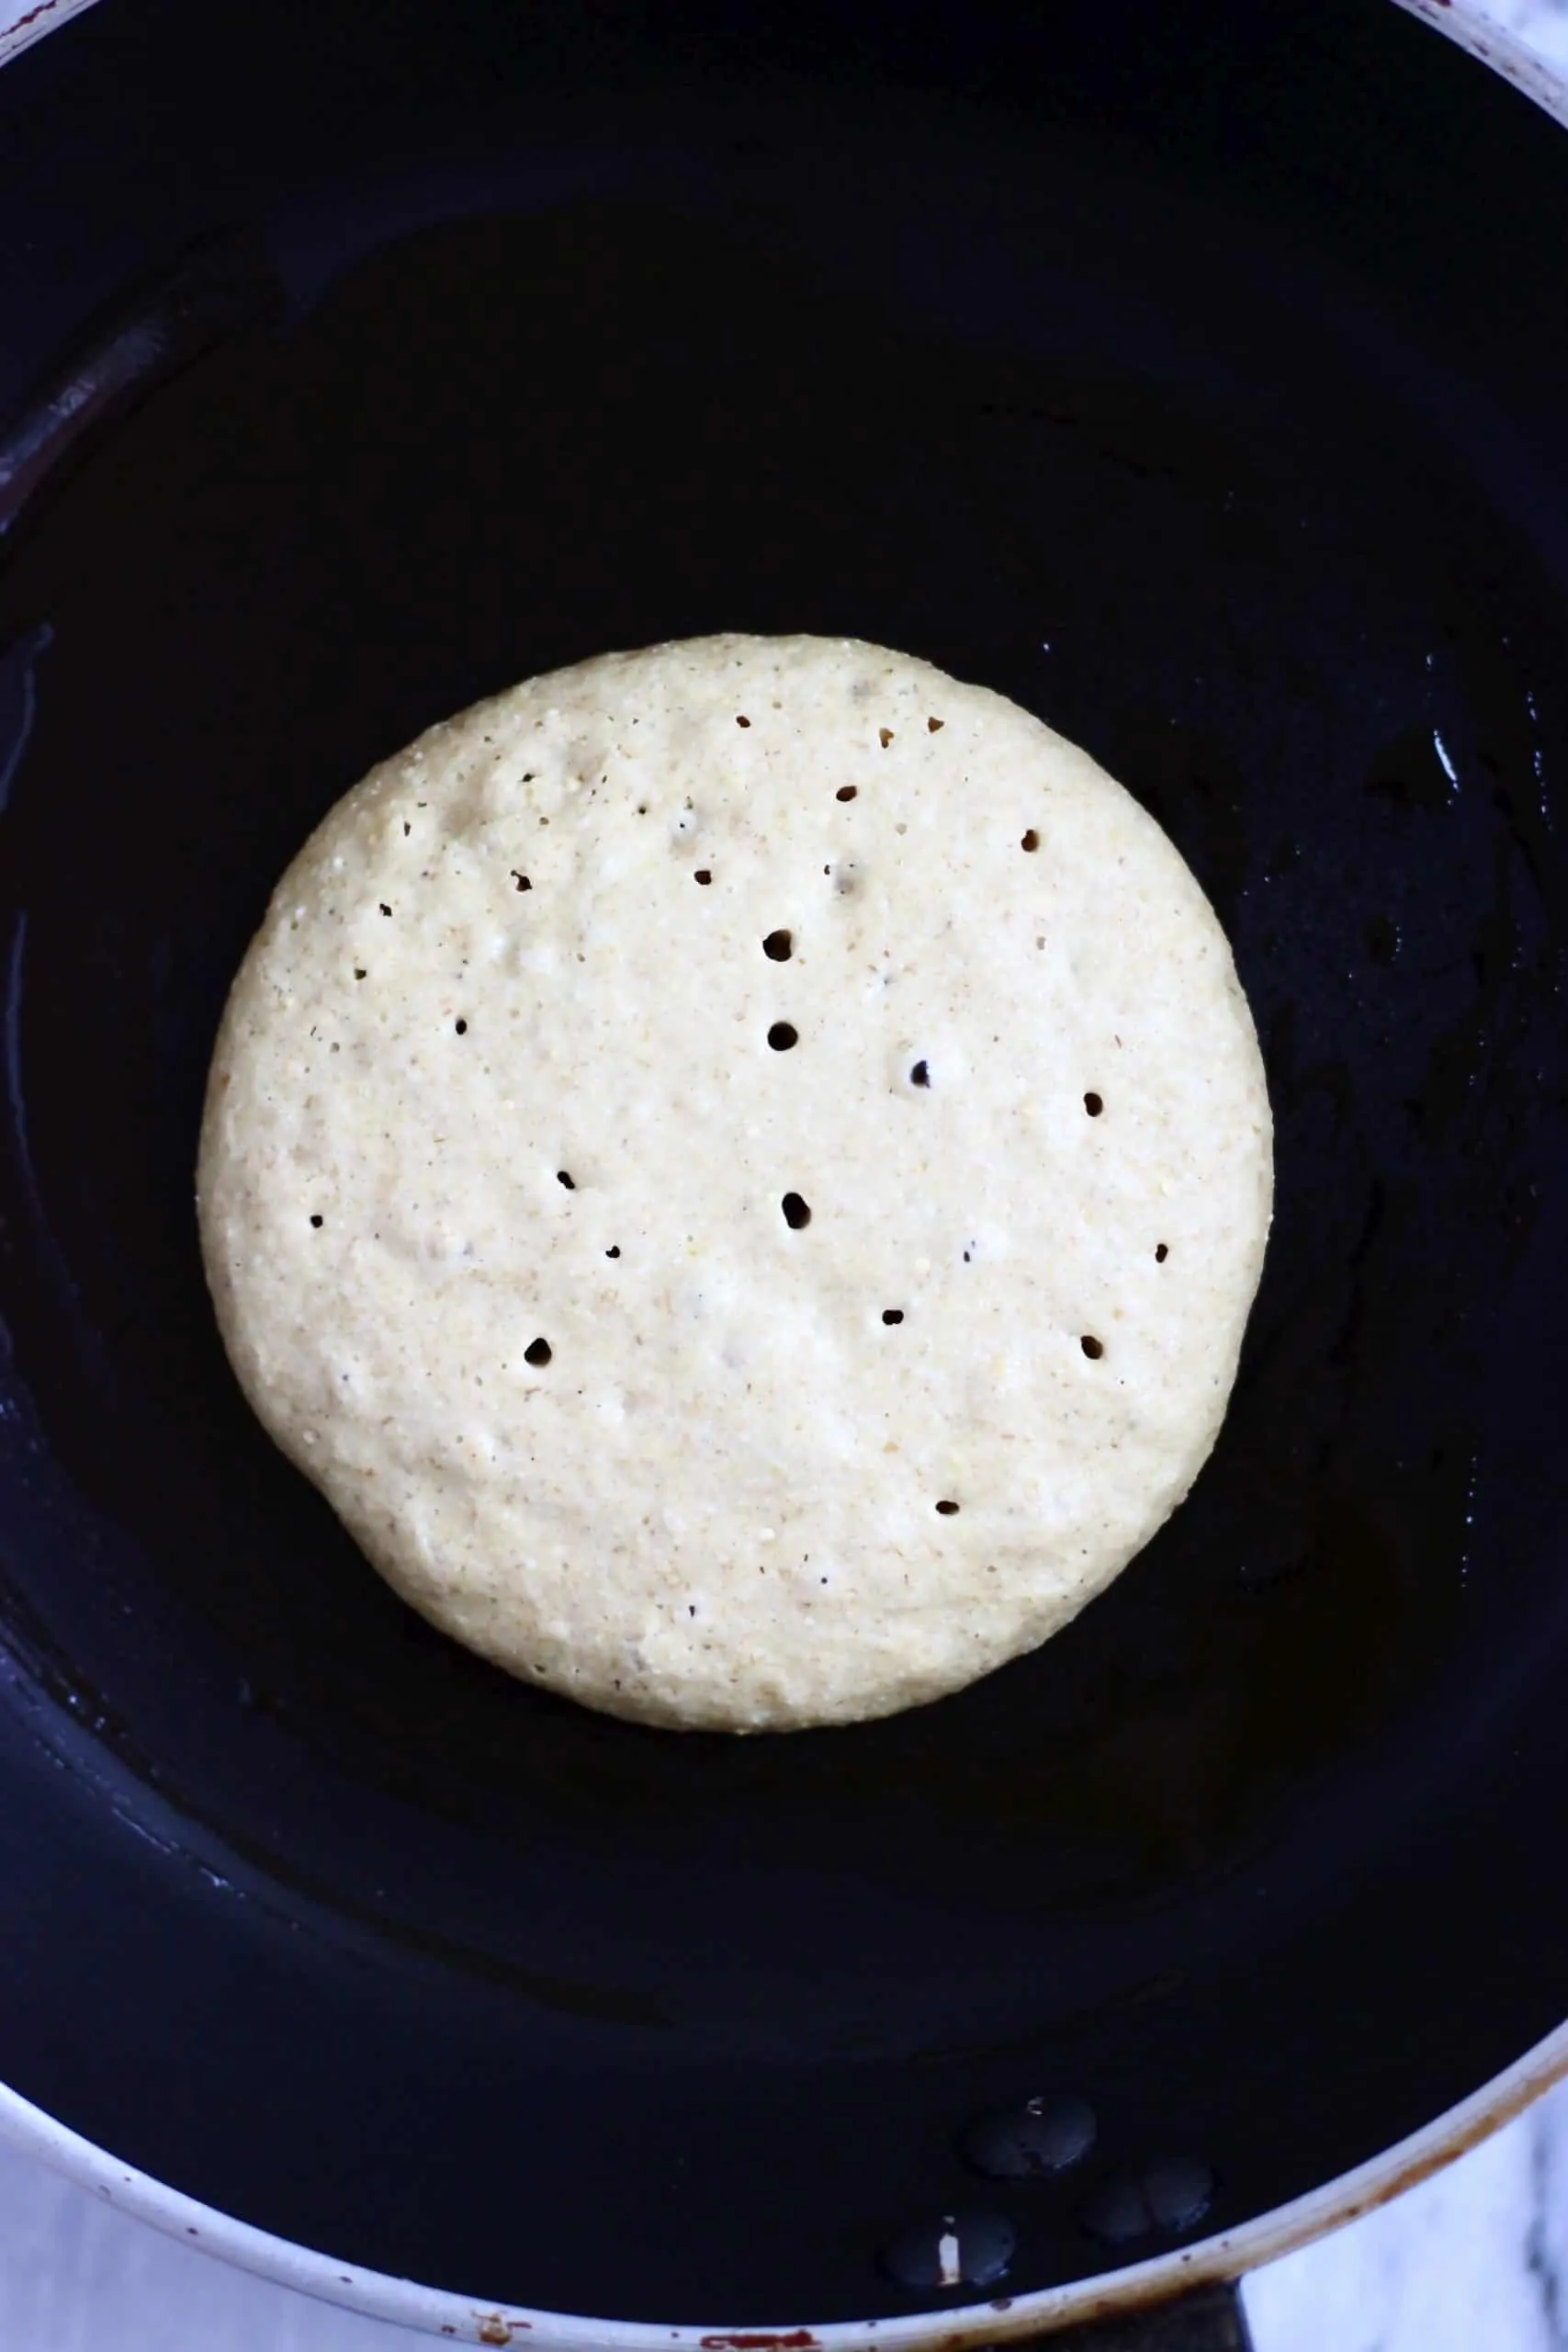 A quinoa pancake with bubbles on the surface being cooked in a black frying pan